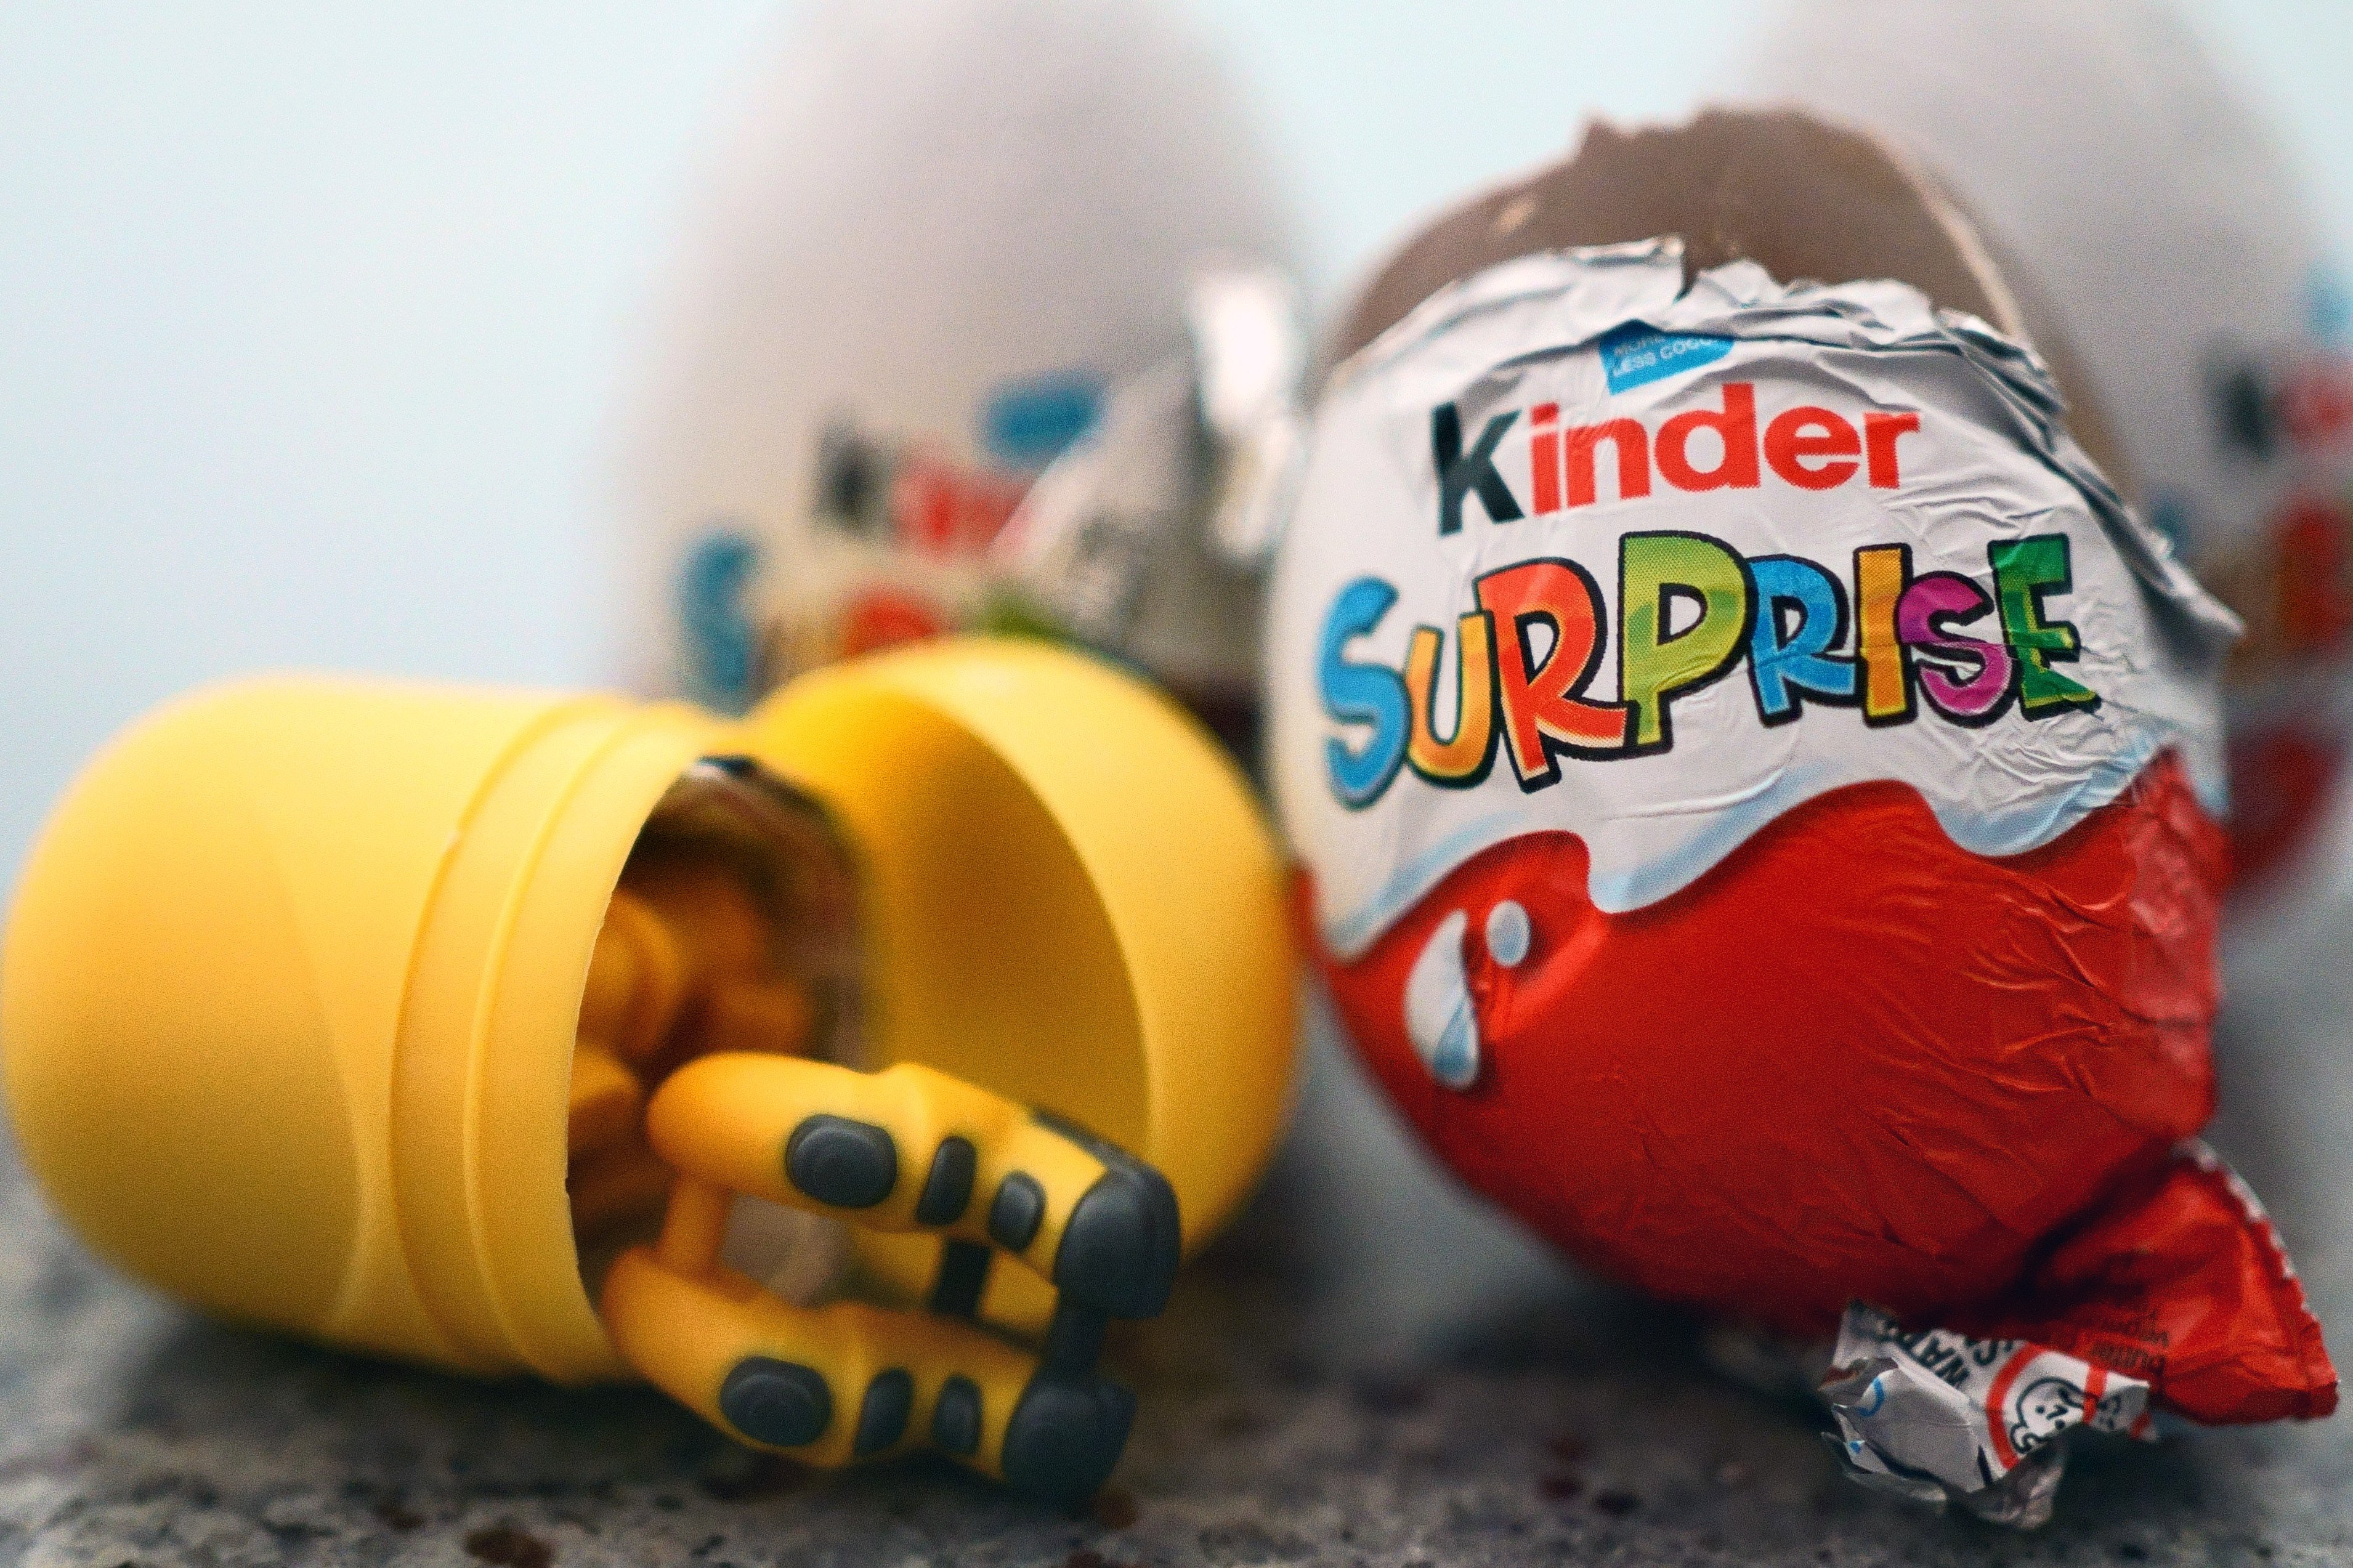 A toy lies next to a British variant of a Kinder Surprise egg. Photo: Victoria Jones/PA Wire/dpa